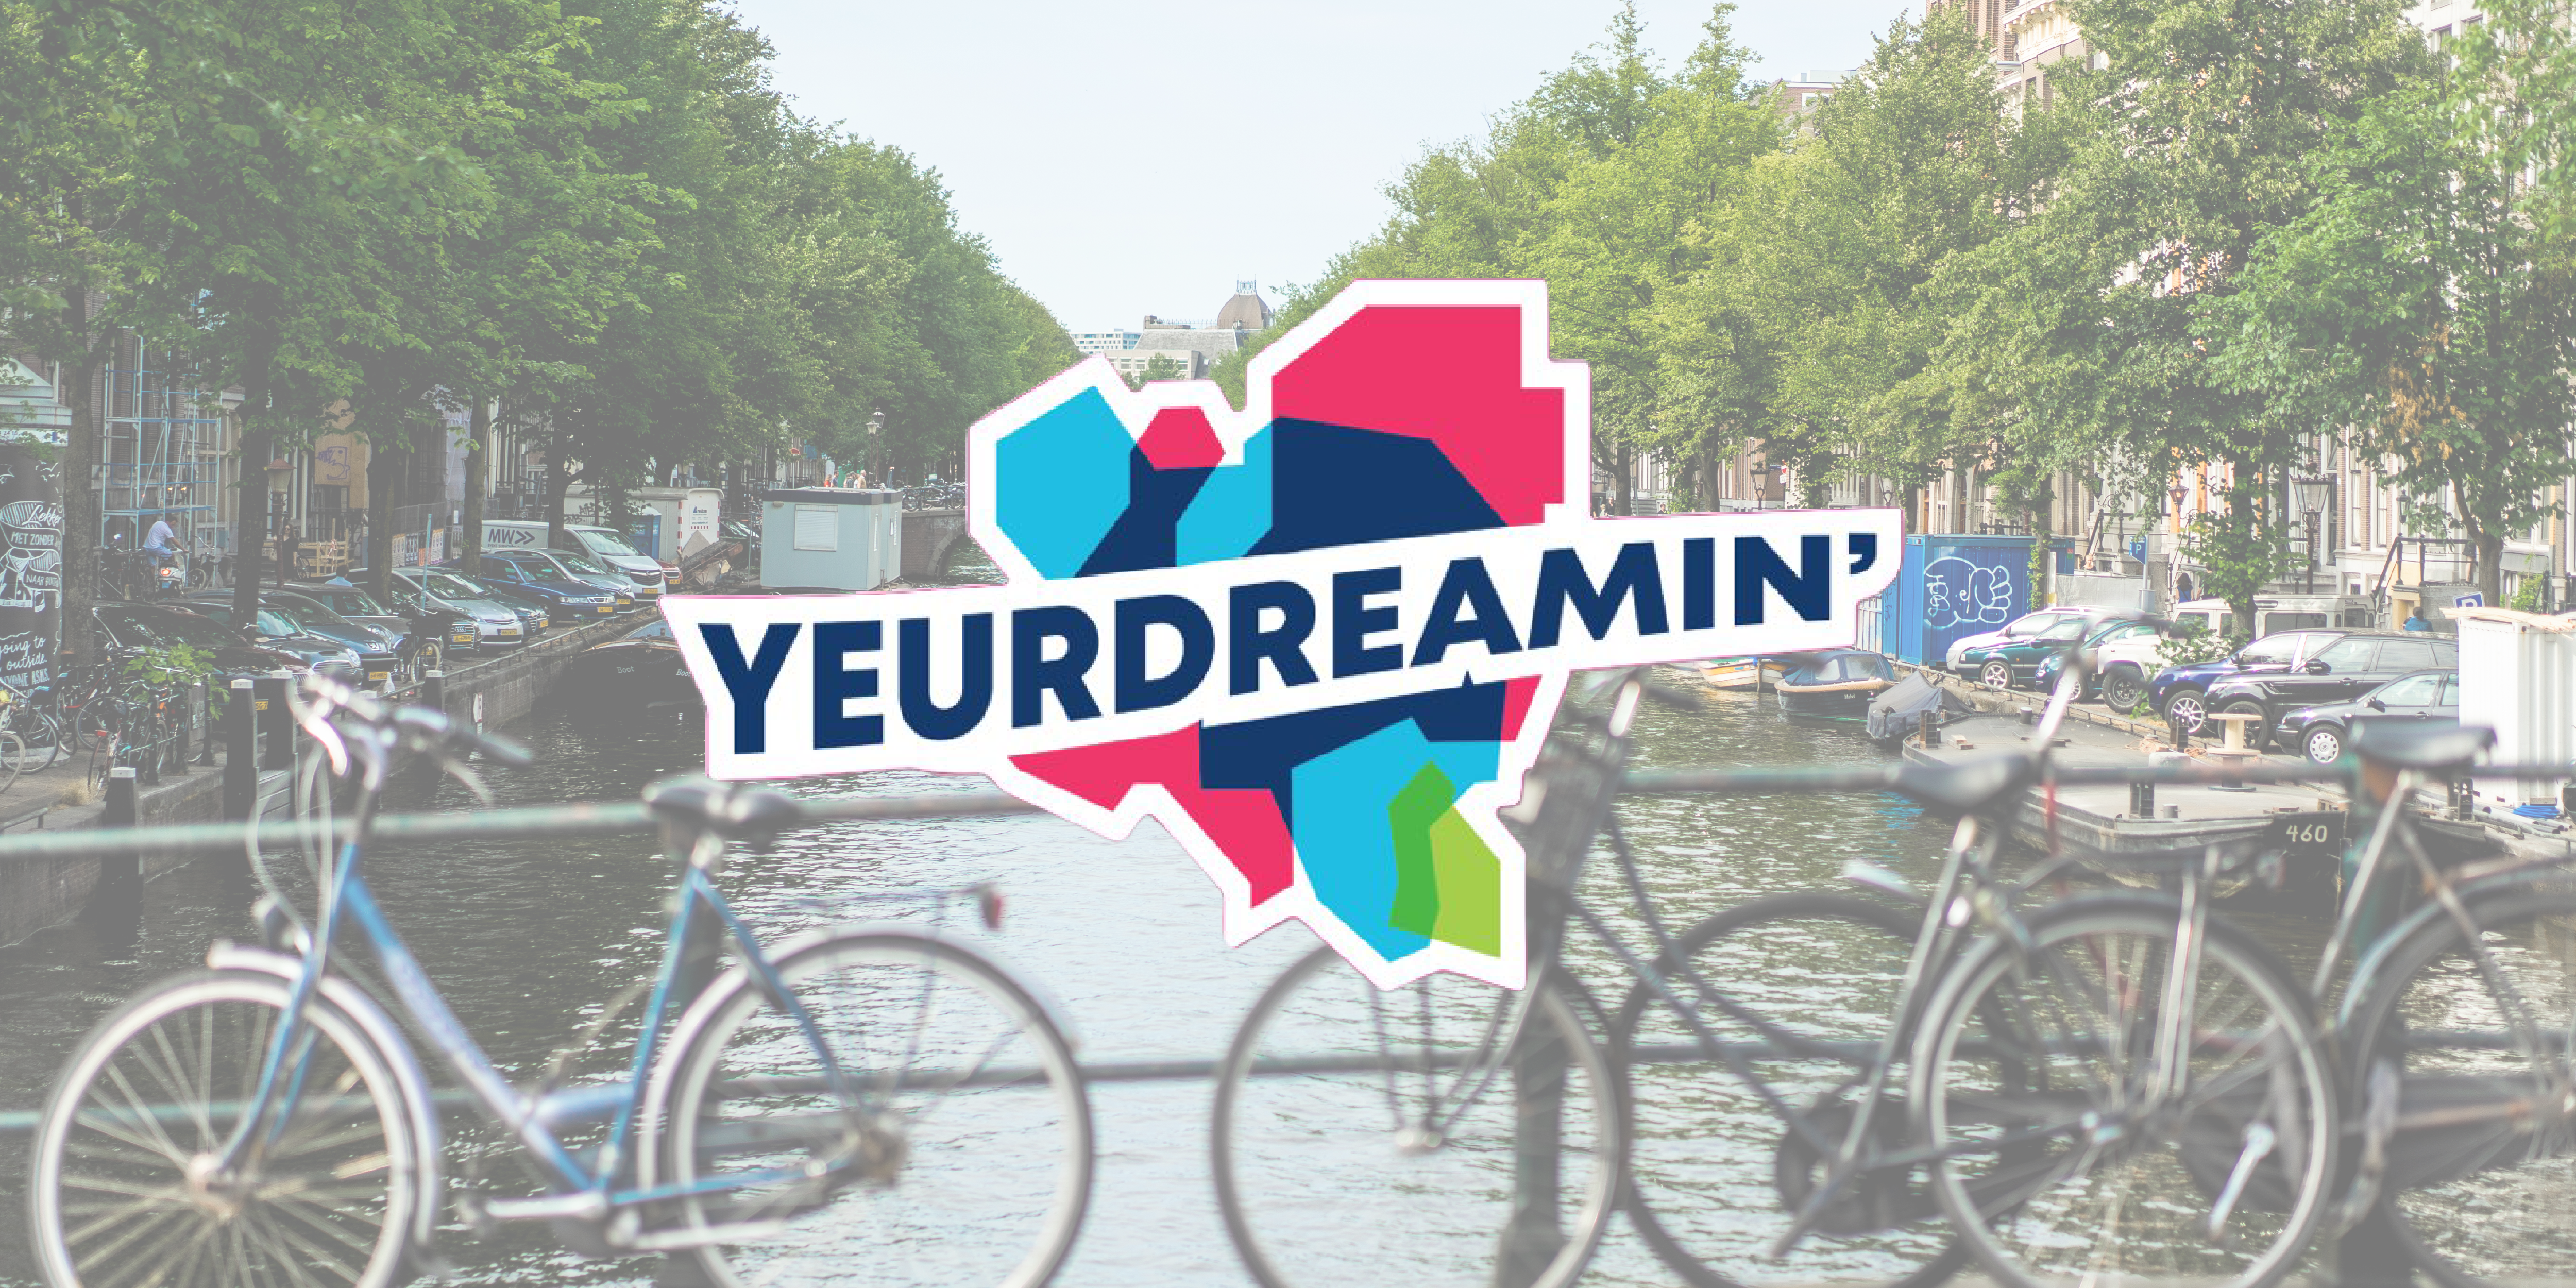 You are currently viewing YeurDreamin’ – die Konferenz der Salesforce Community in Amsterdam!